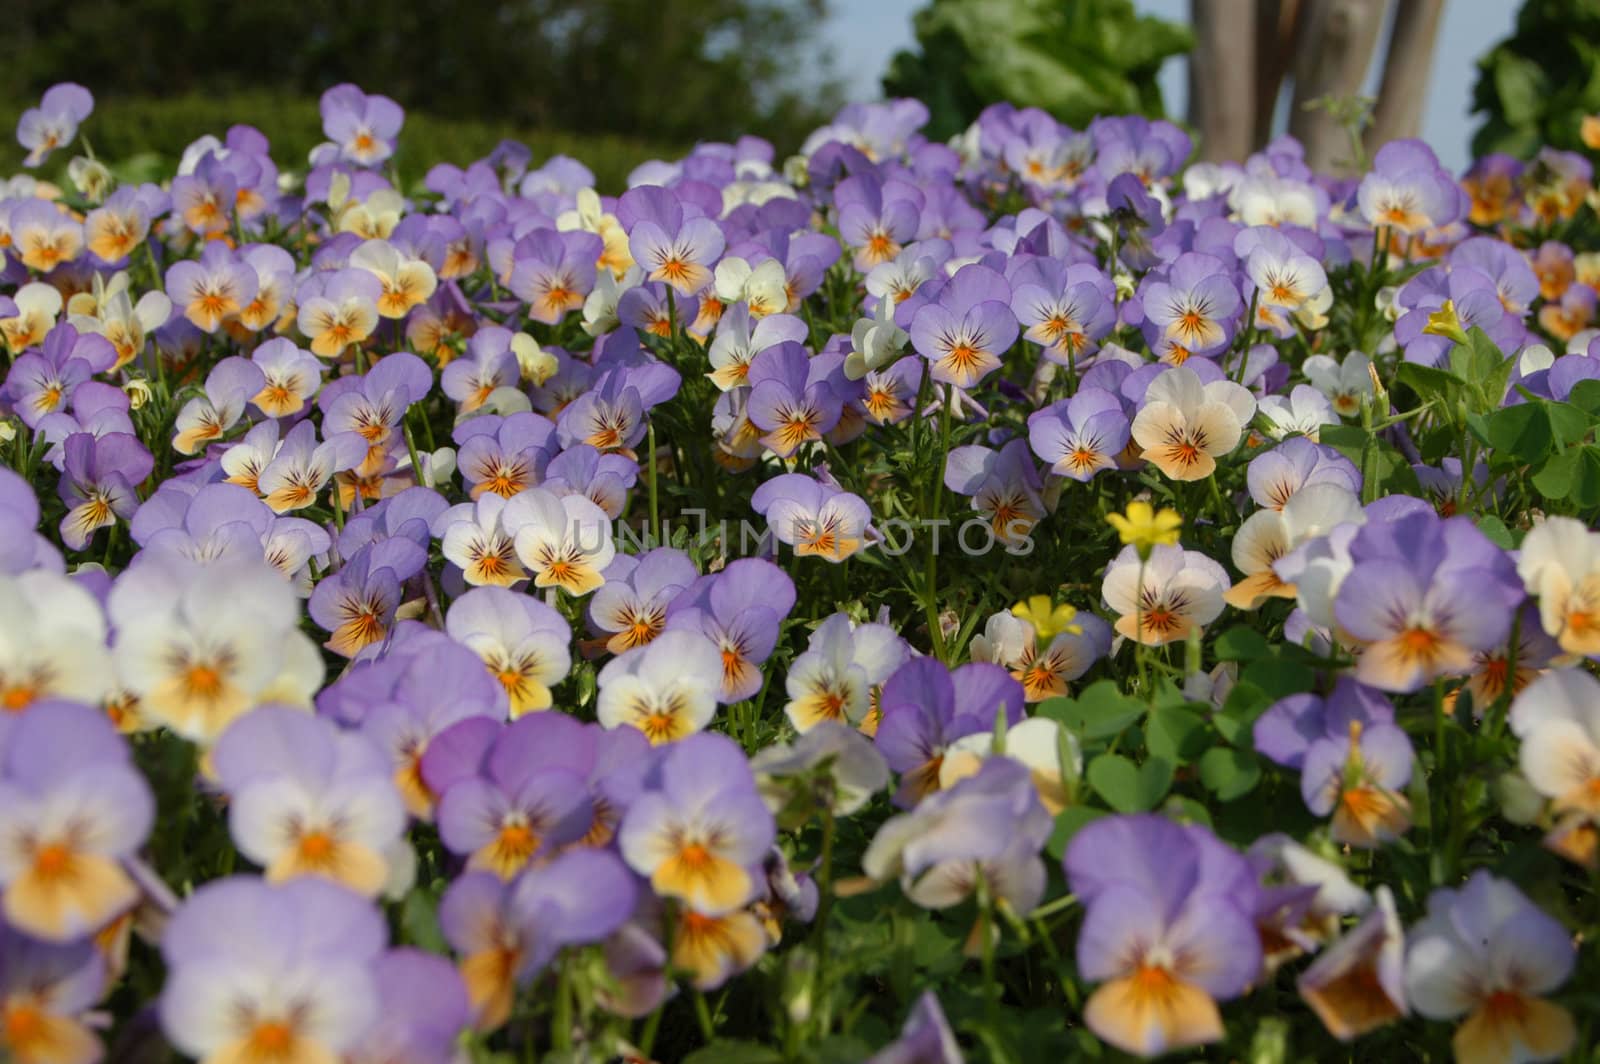 Pansies in the field by northwoodsphoto